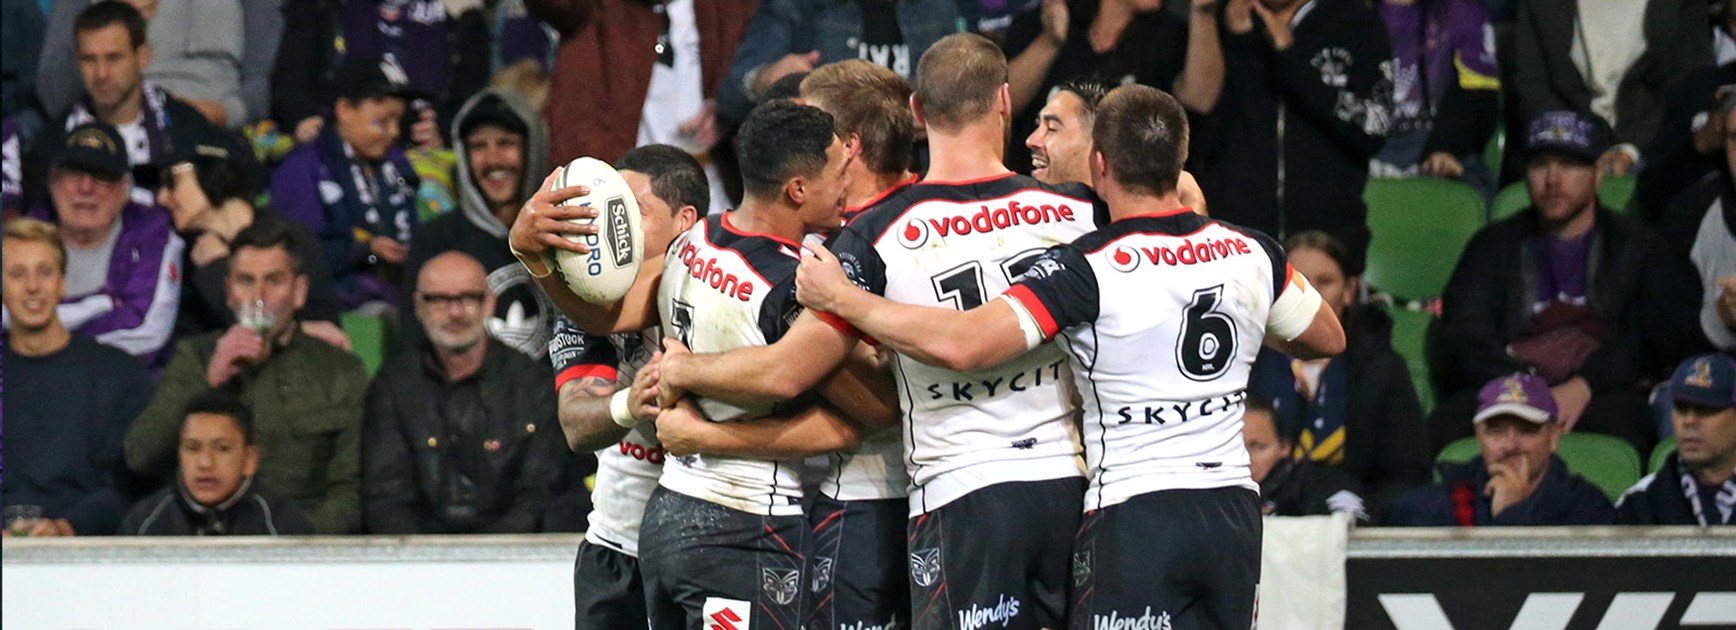 Warriors celebrate a try against the Storm on Anzac Day.